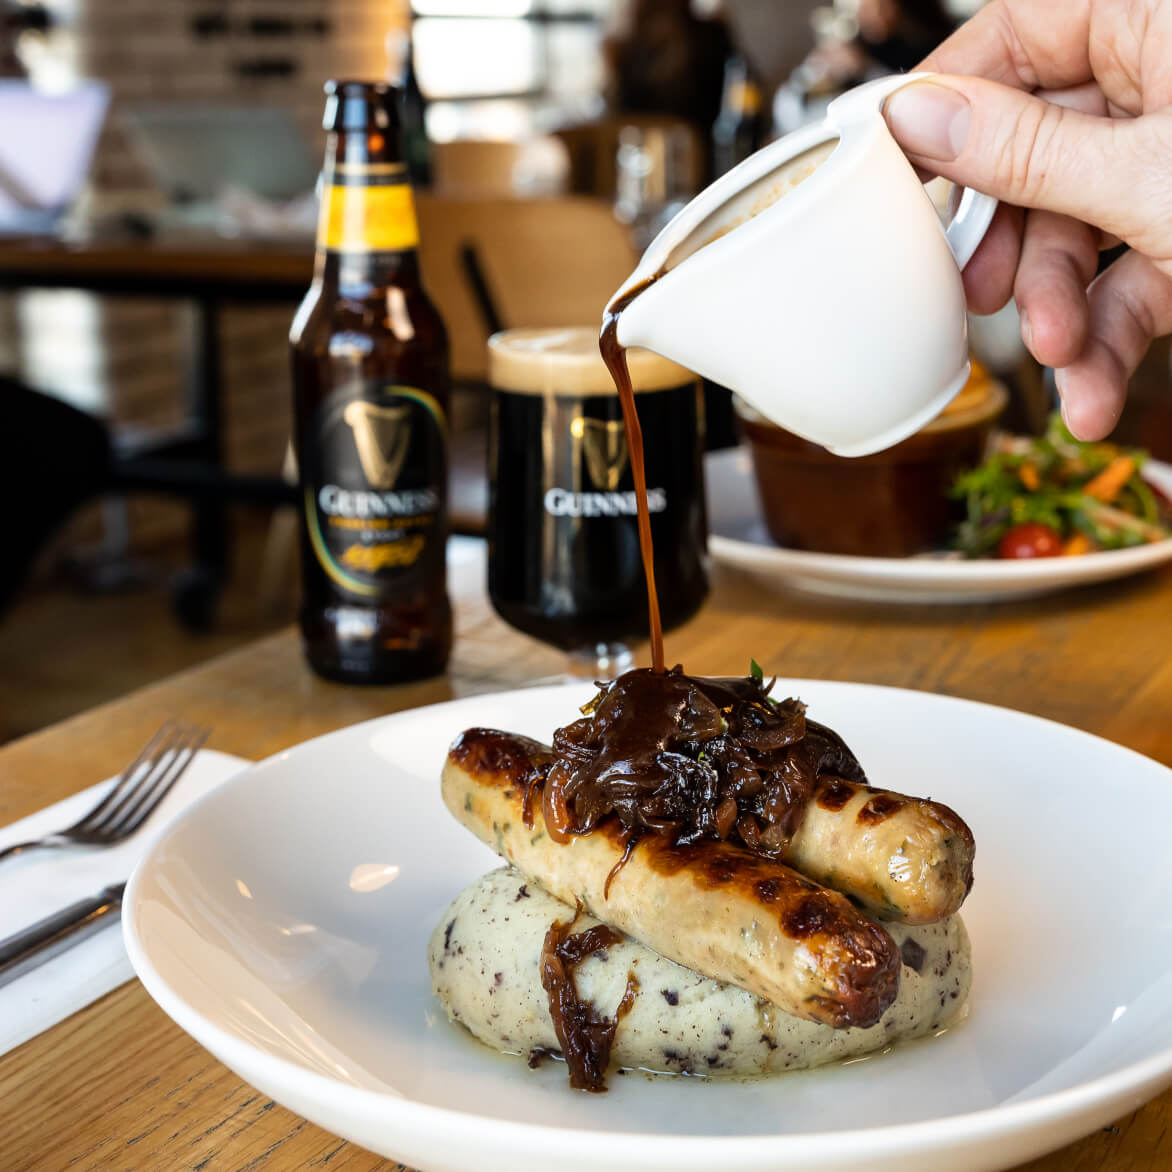 Someone pouring Guinness & red onion gravy over their bangers & mash, recommended to be served with Guinness foreign extra stout which can be seen blurred in the background.